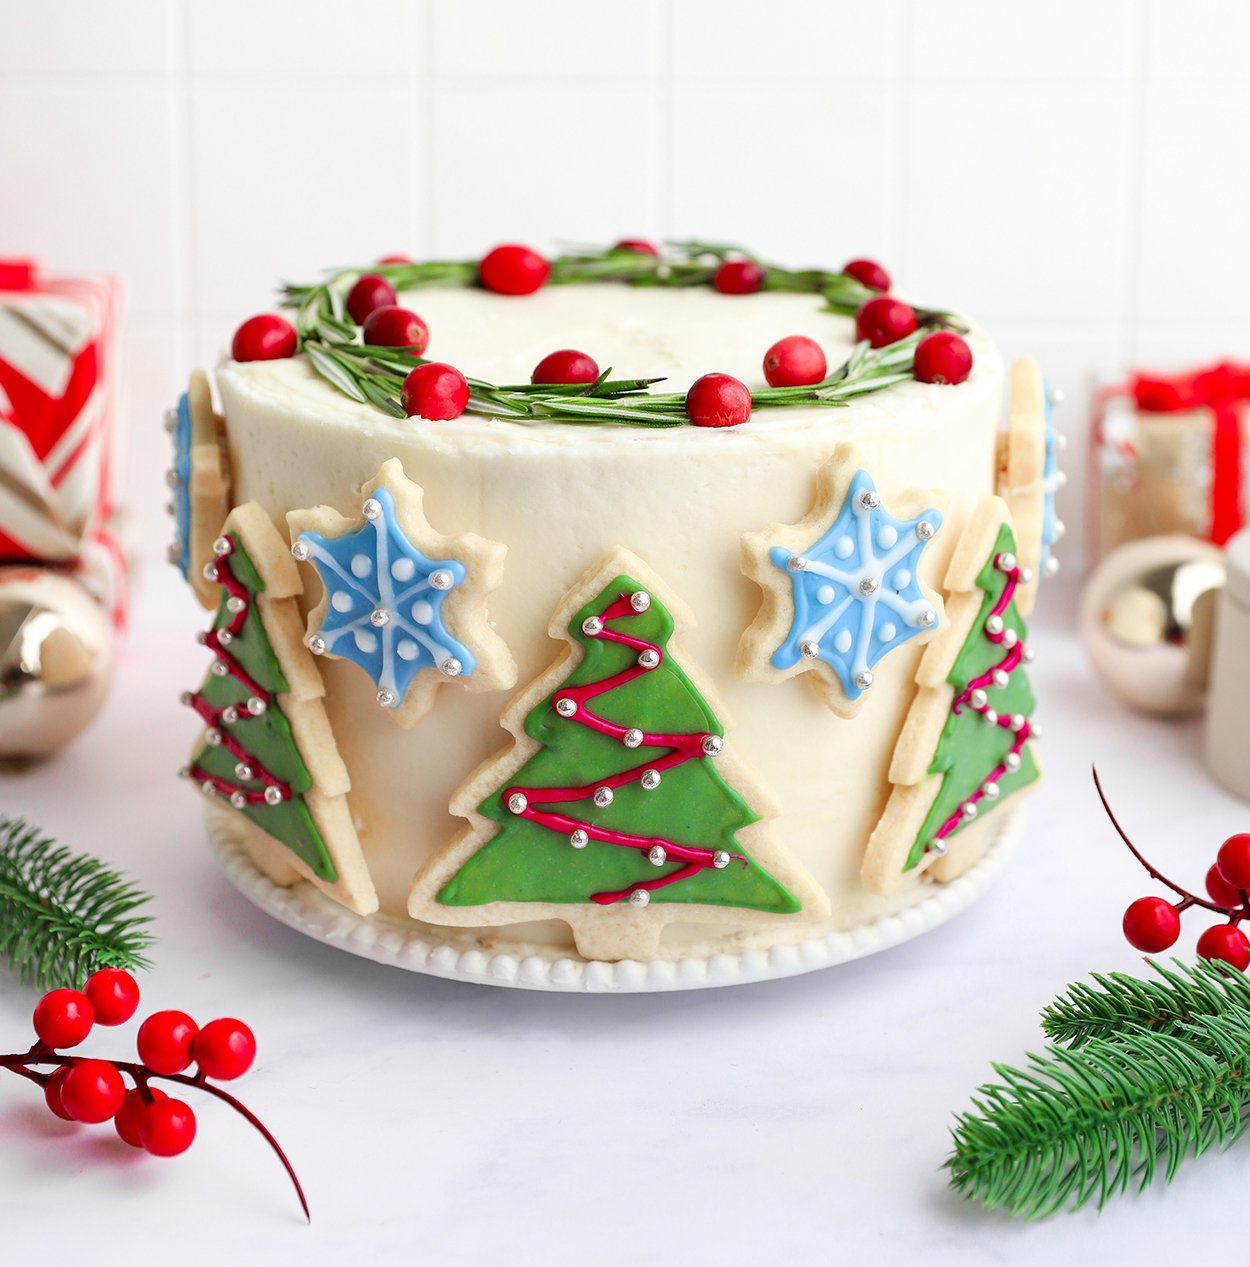 Christmas Cookie Cake with Rosemary & Cranberries | Artificial Dye ...